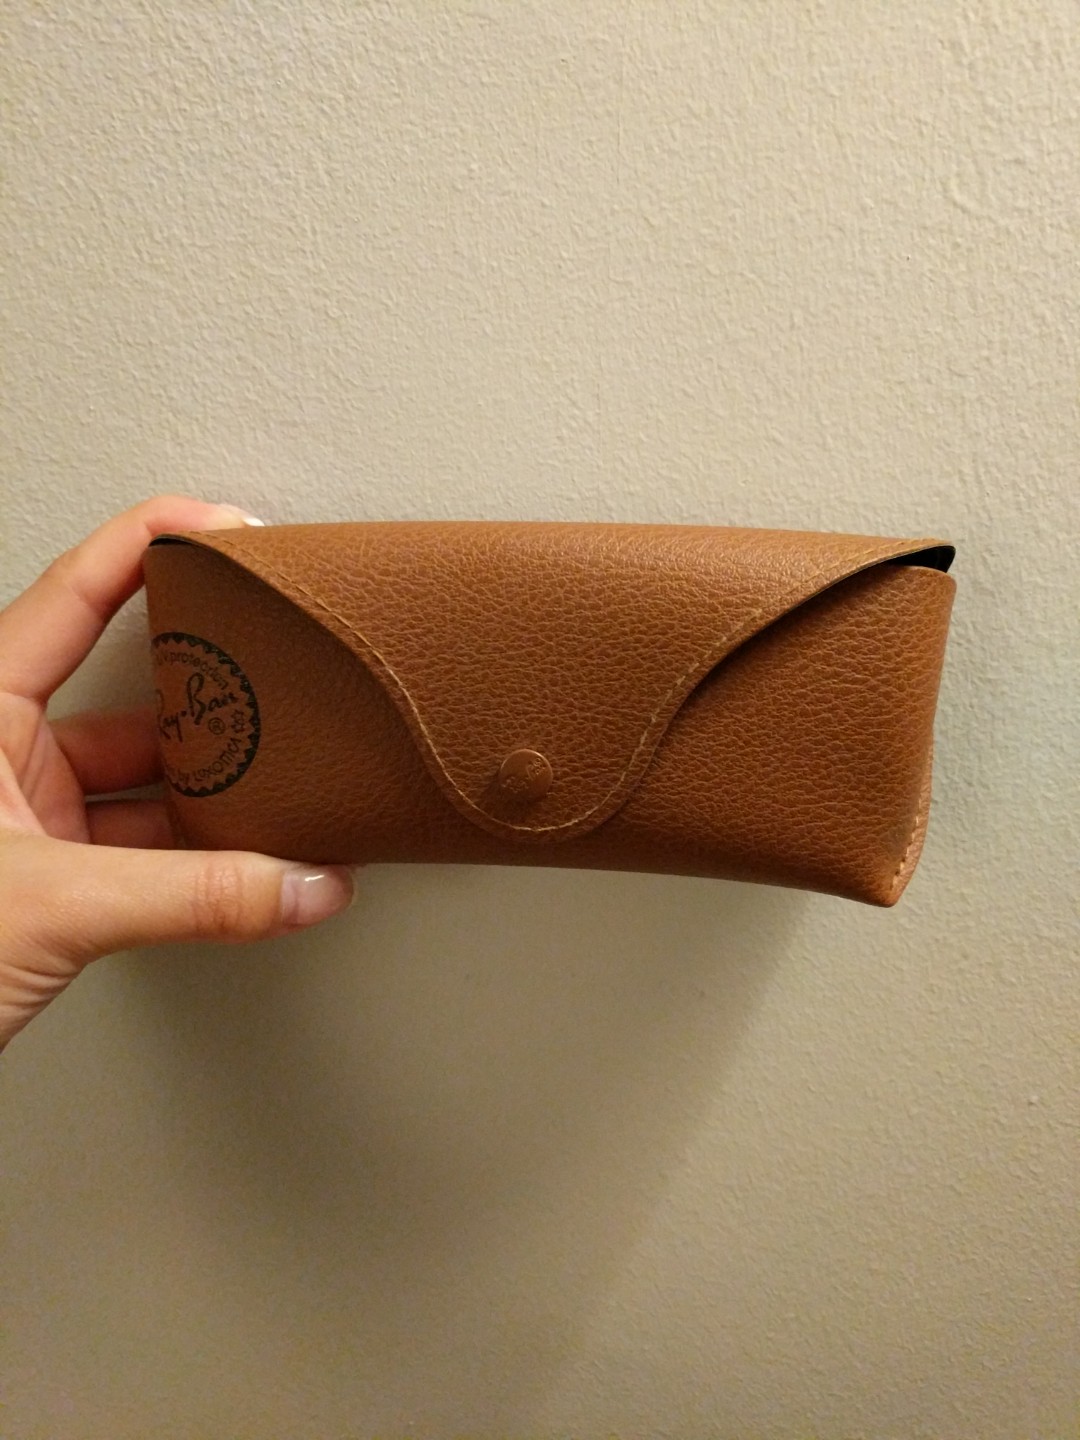 ray ban pouch case